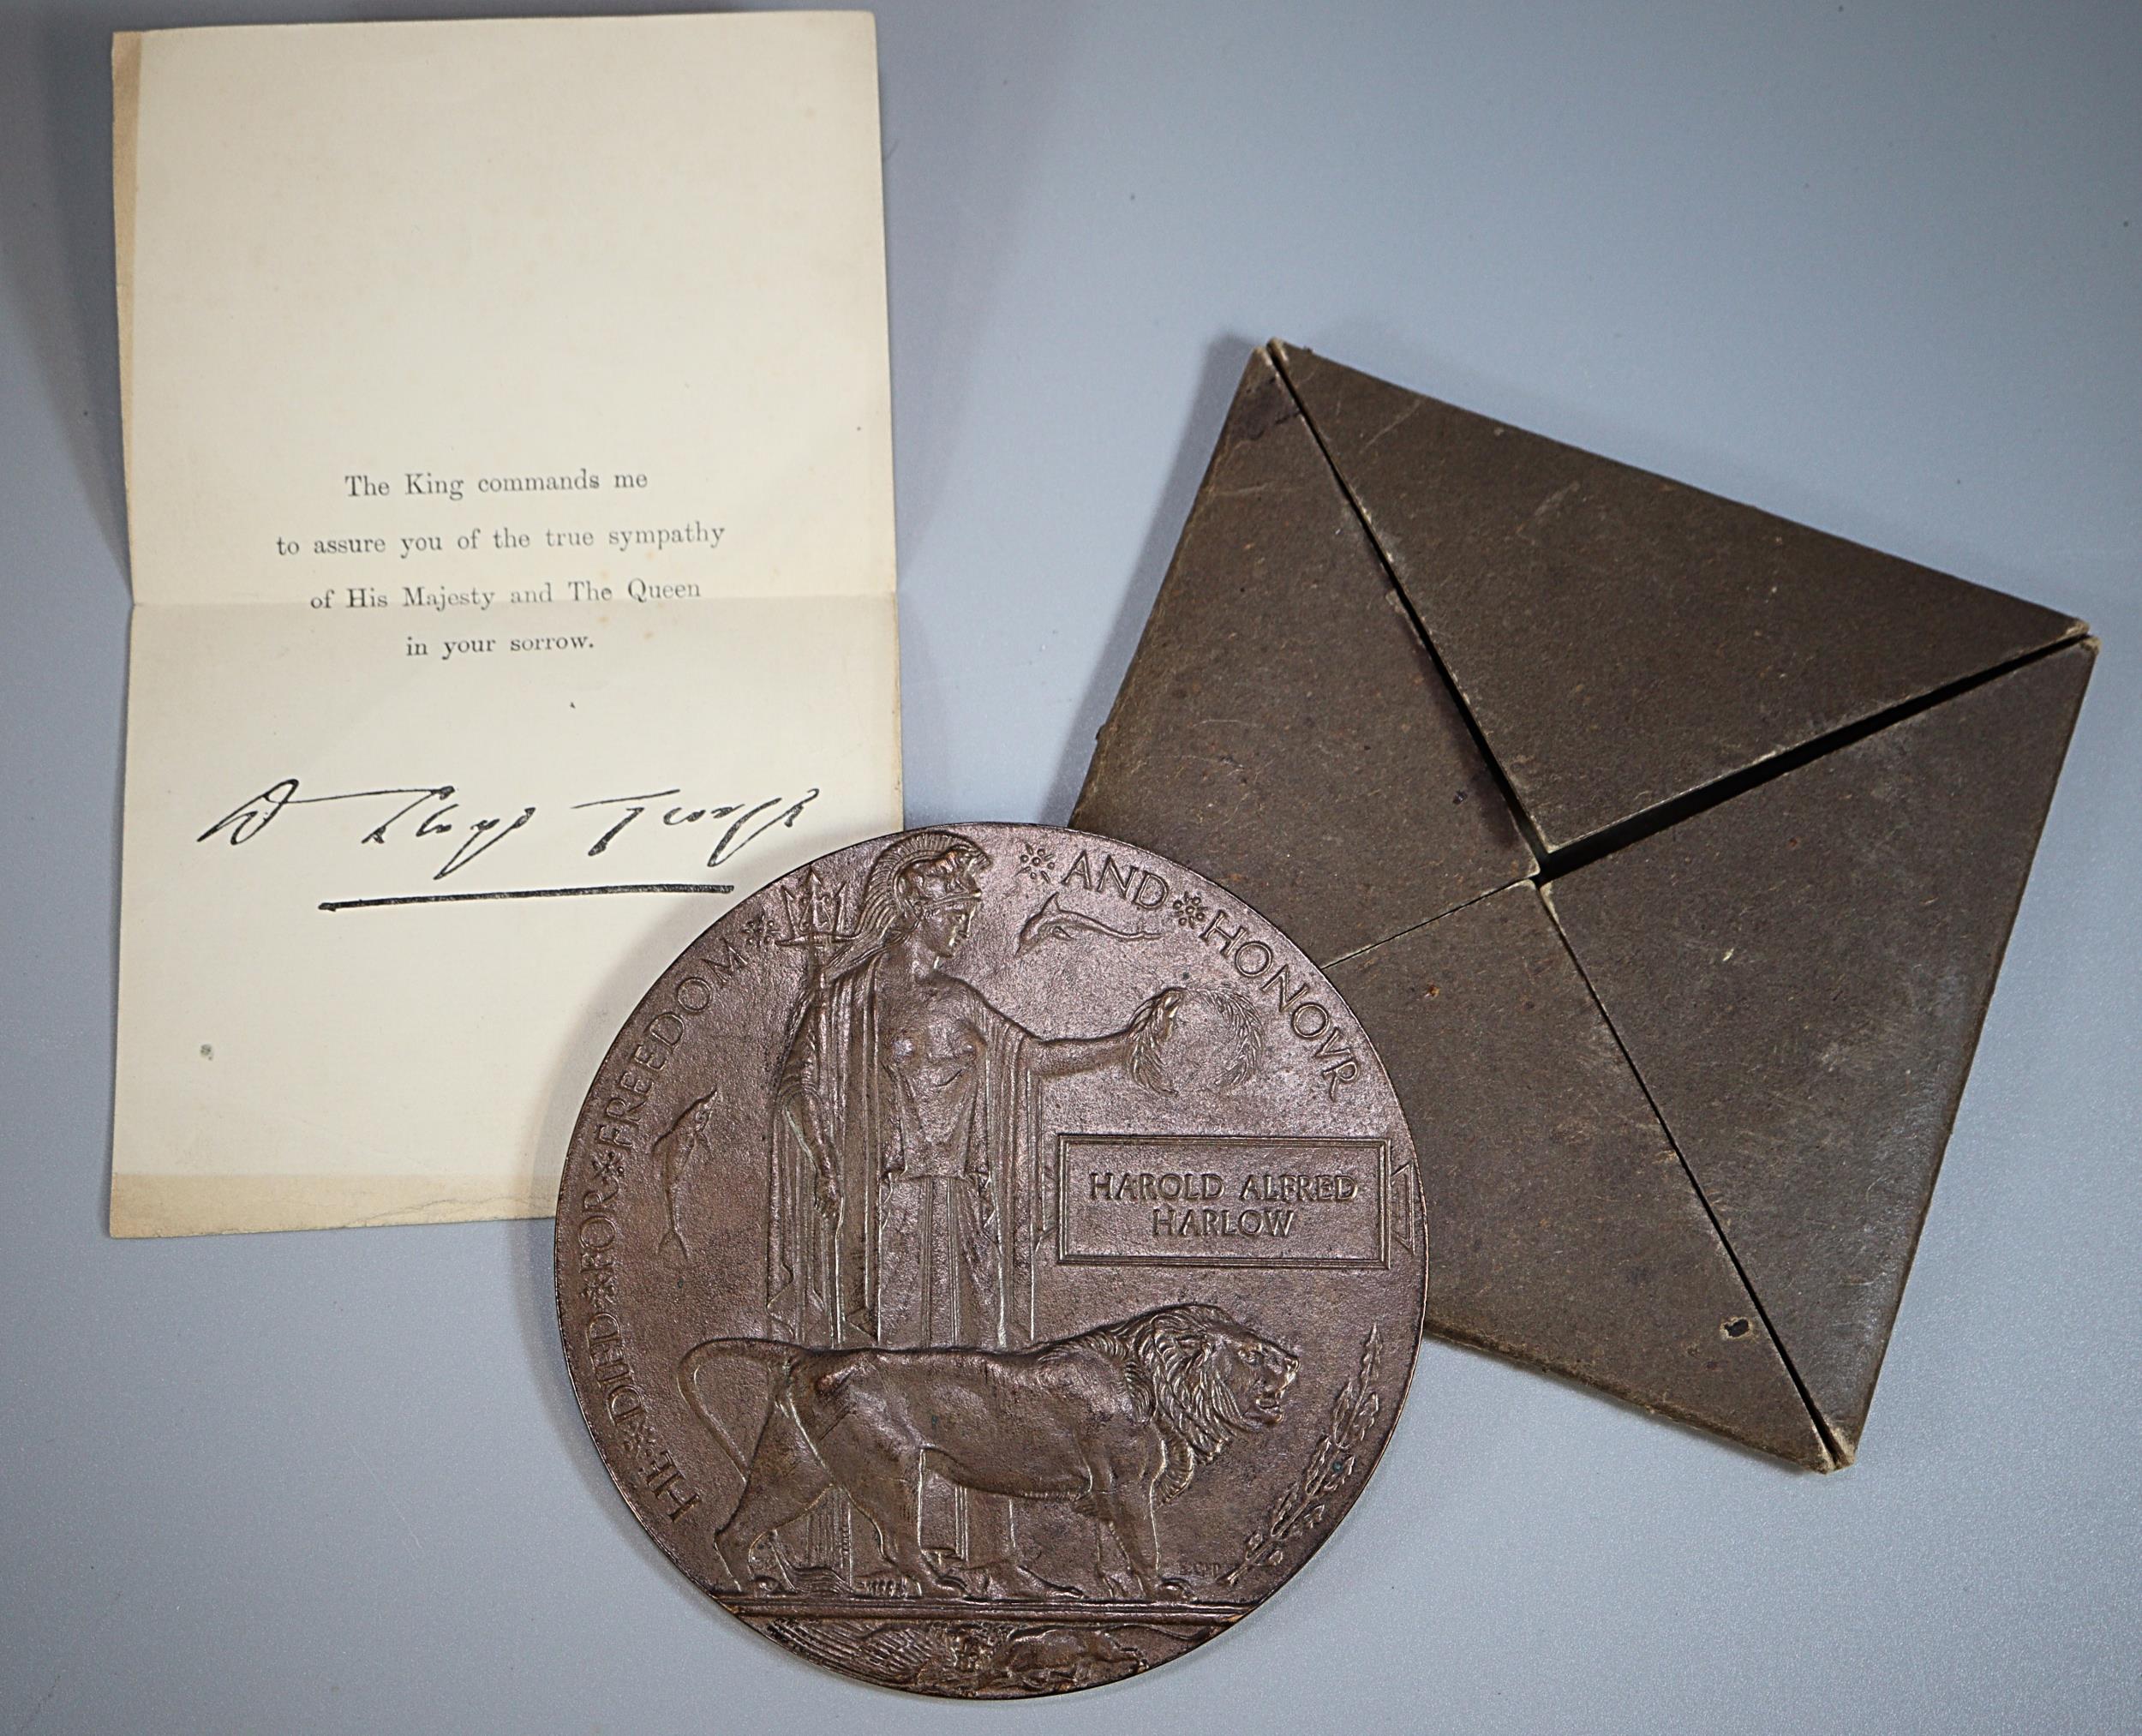 WWI bronze Death Penny, Harold Alfred Harlow, in original envelope case and facsimile message from